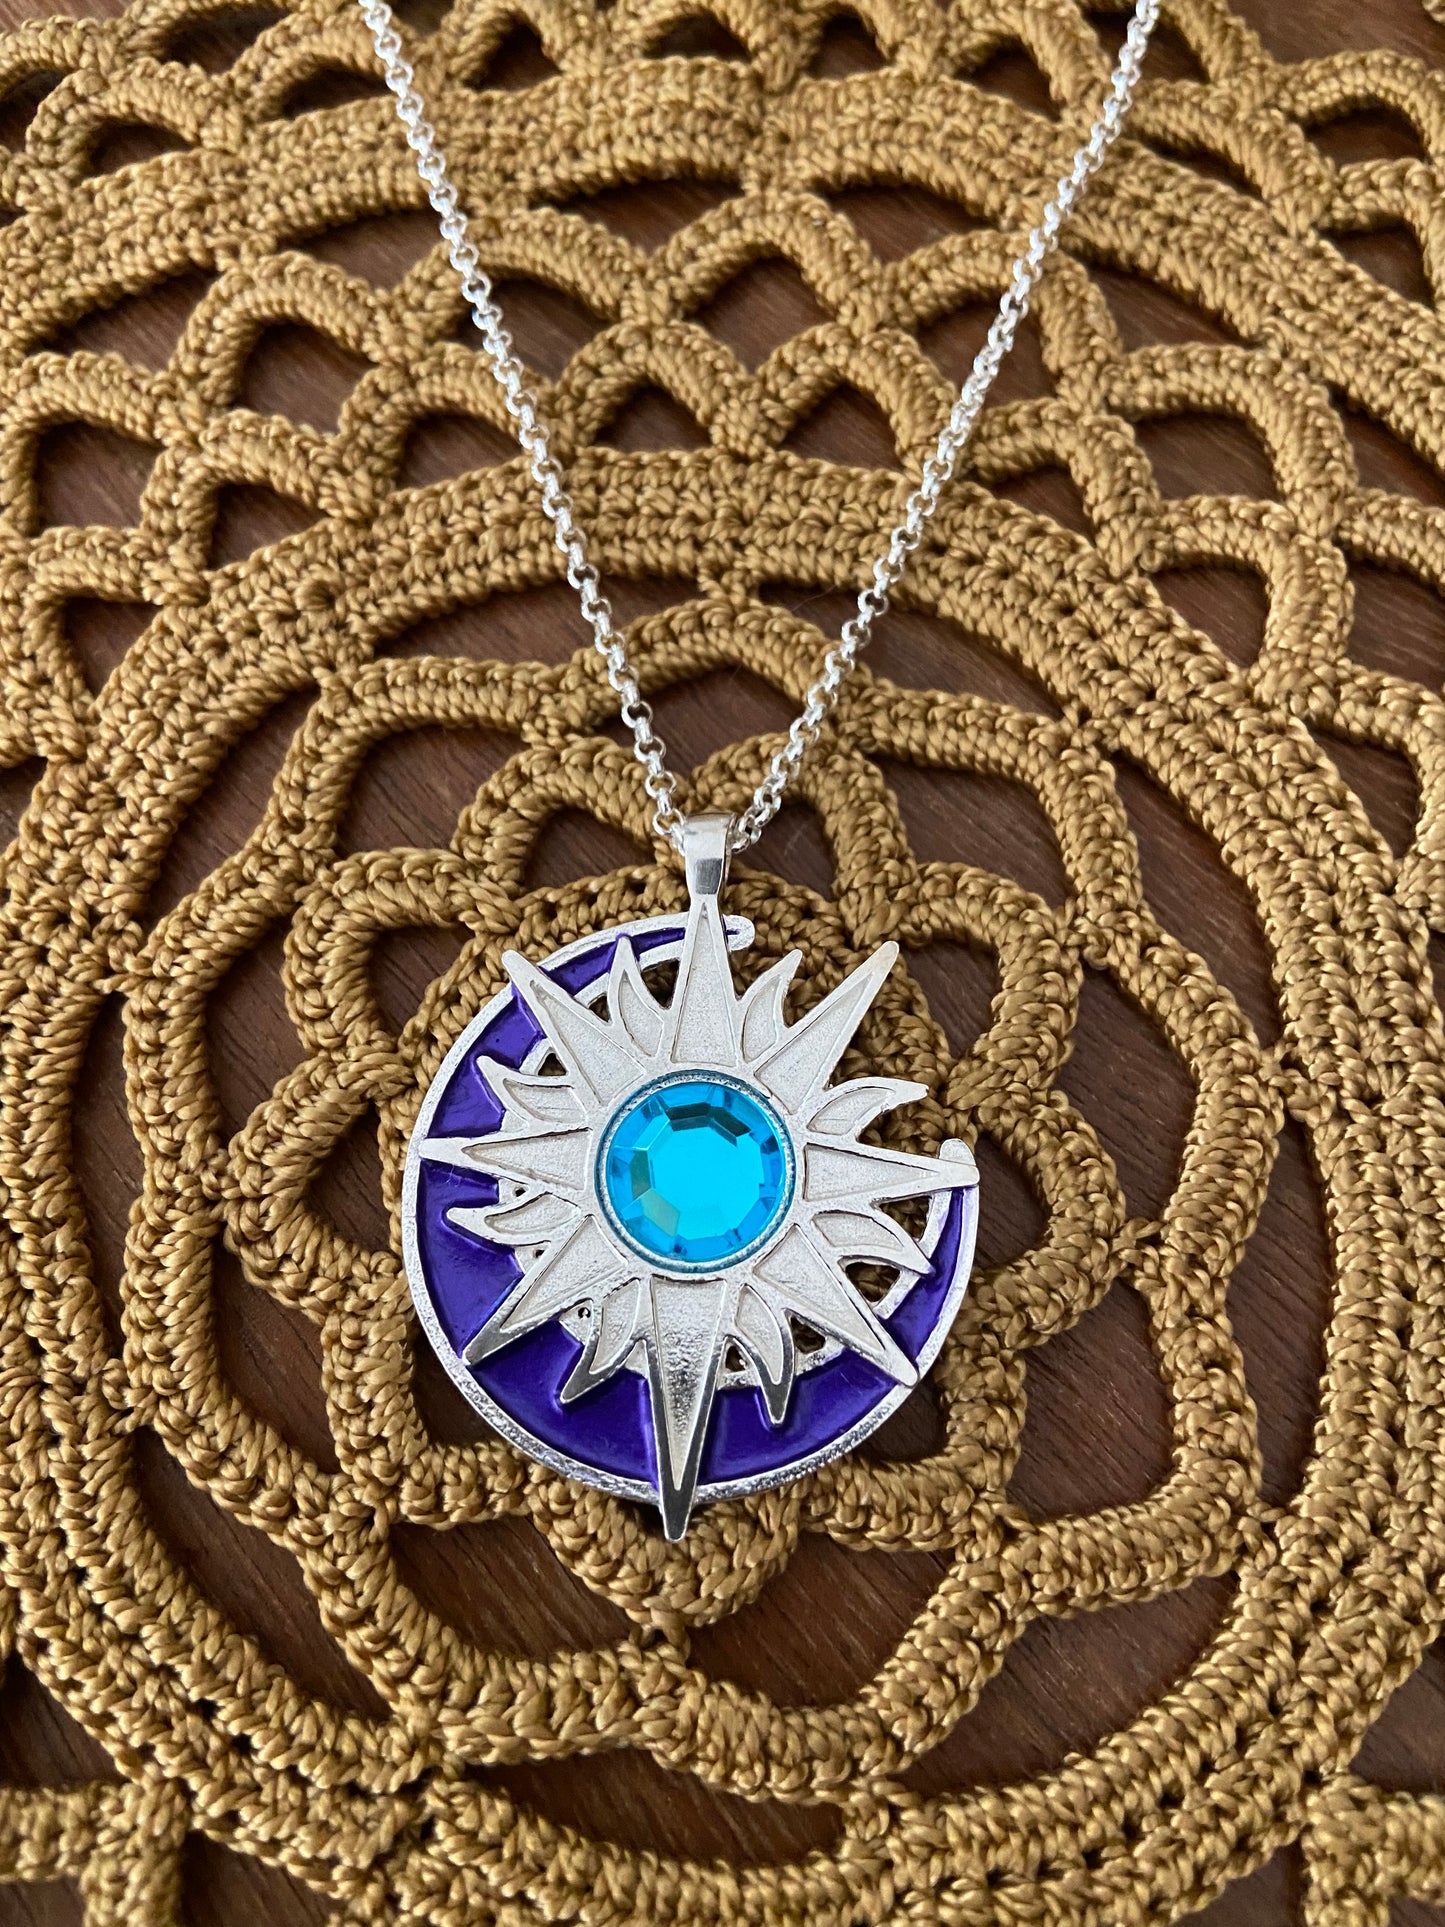 Sterling Silver Handmade Bright finish Twitches Sun/Moon Pendant “15 year anniversary edition”